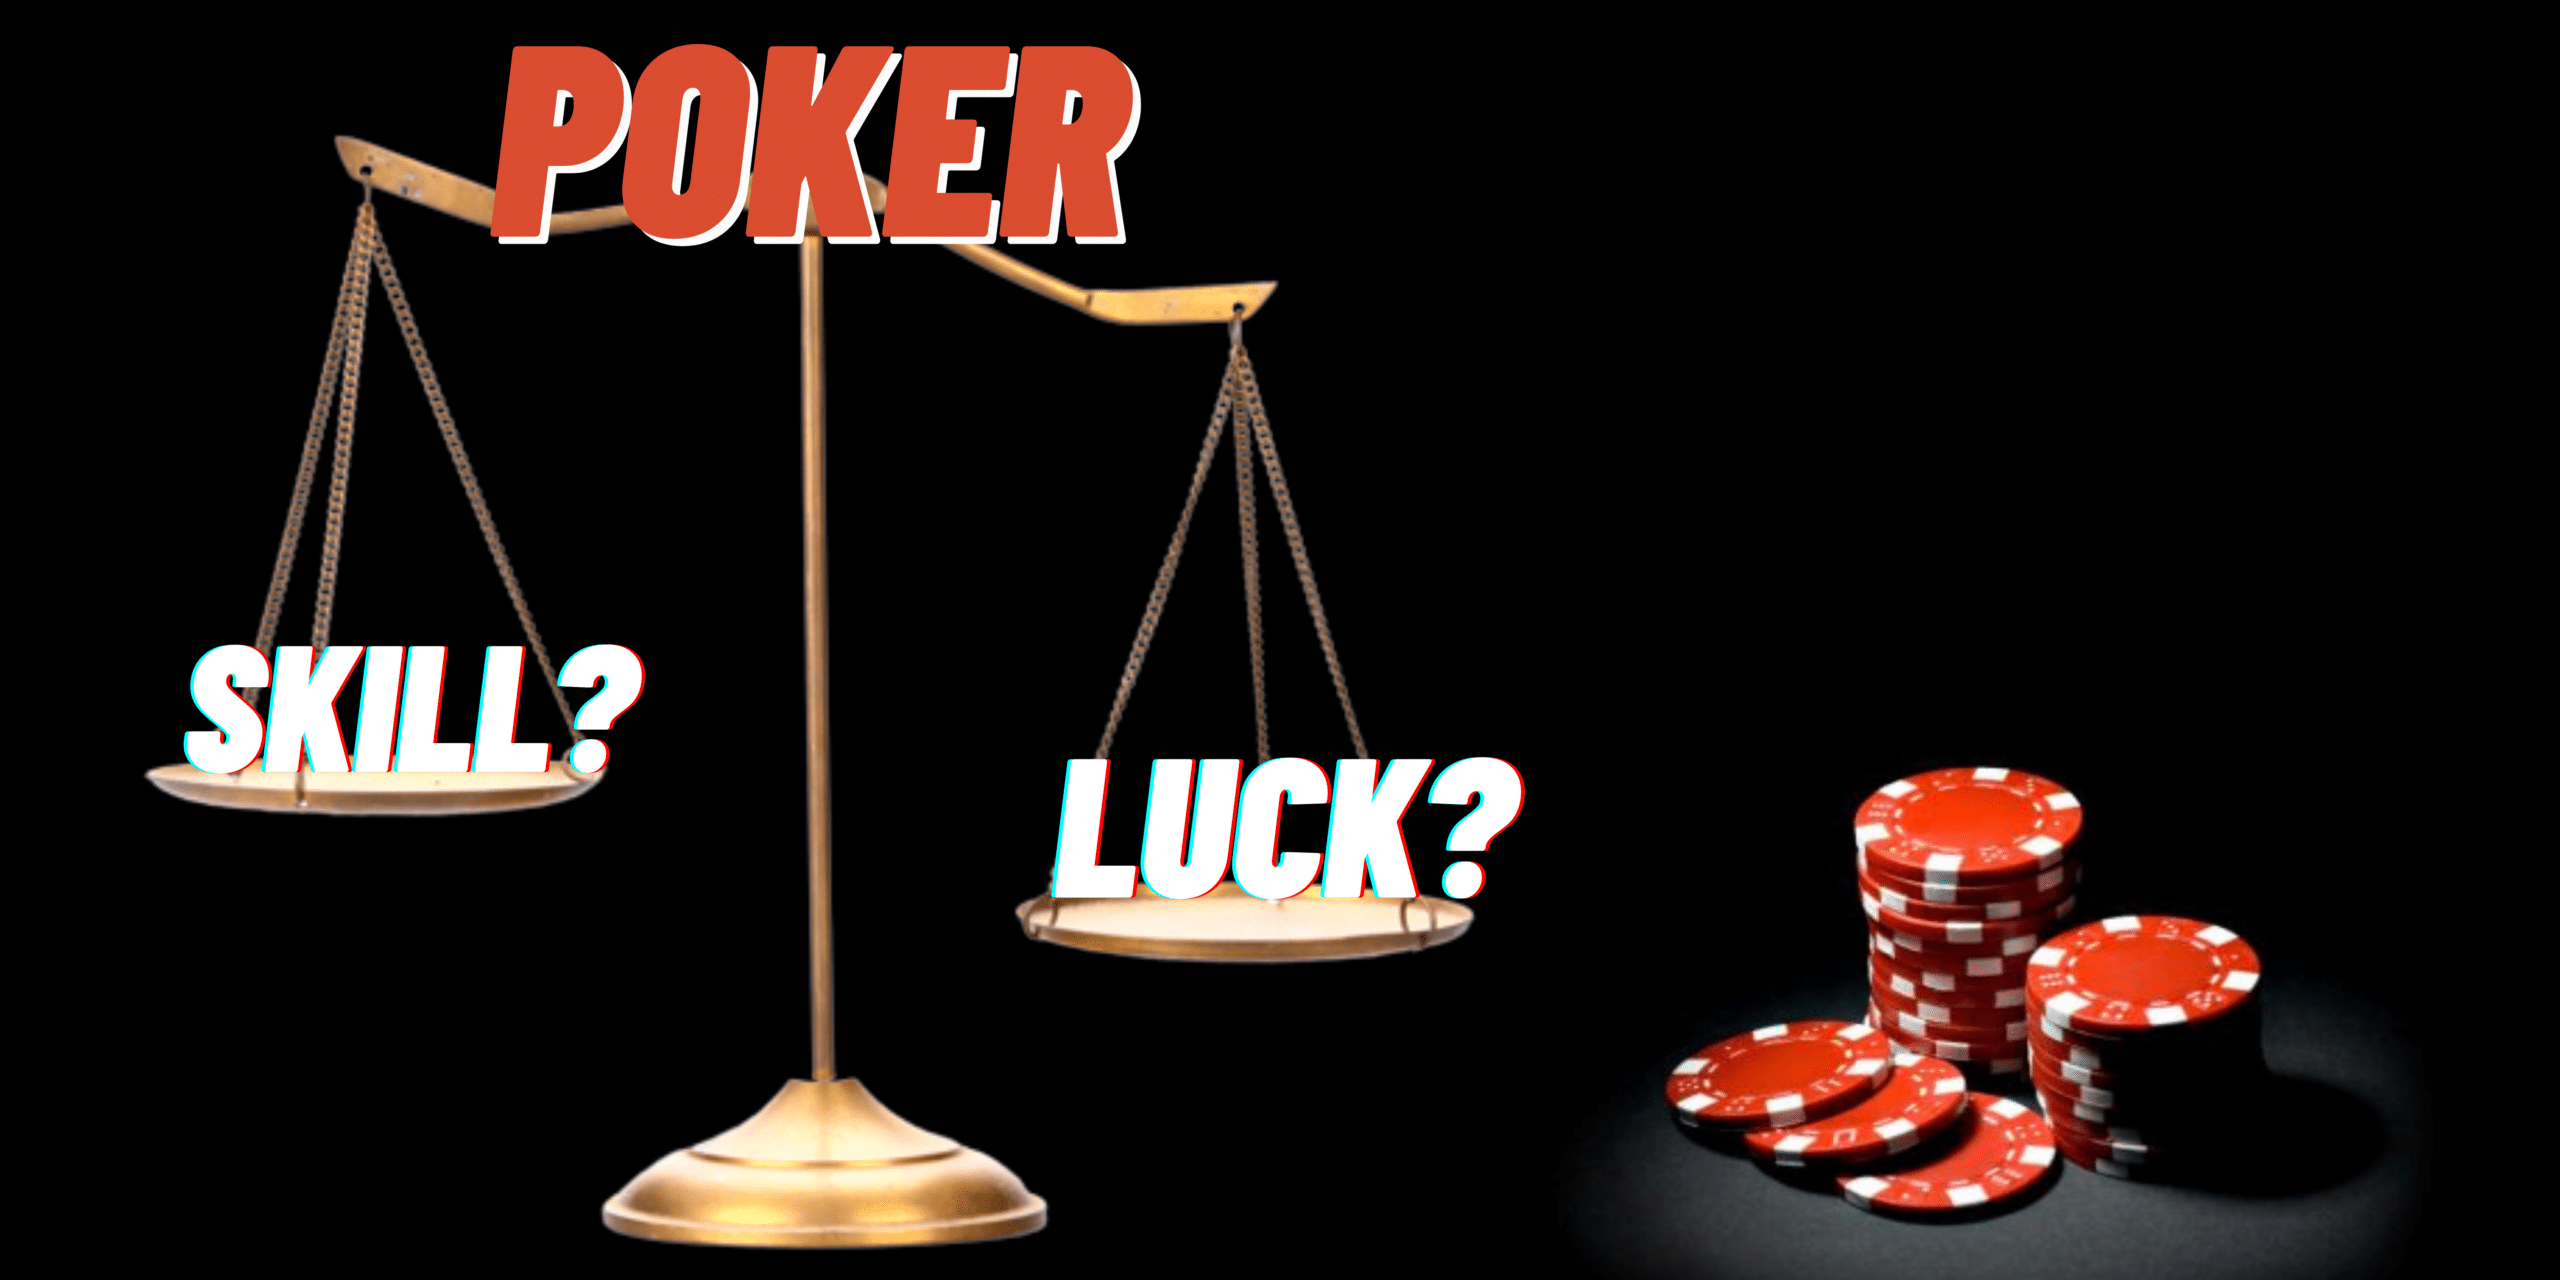 Poker is a Game of Skill,or a Game of Luck?